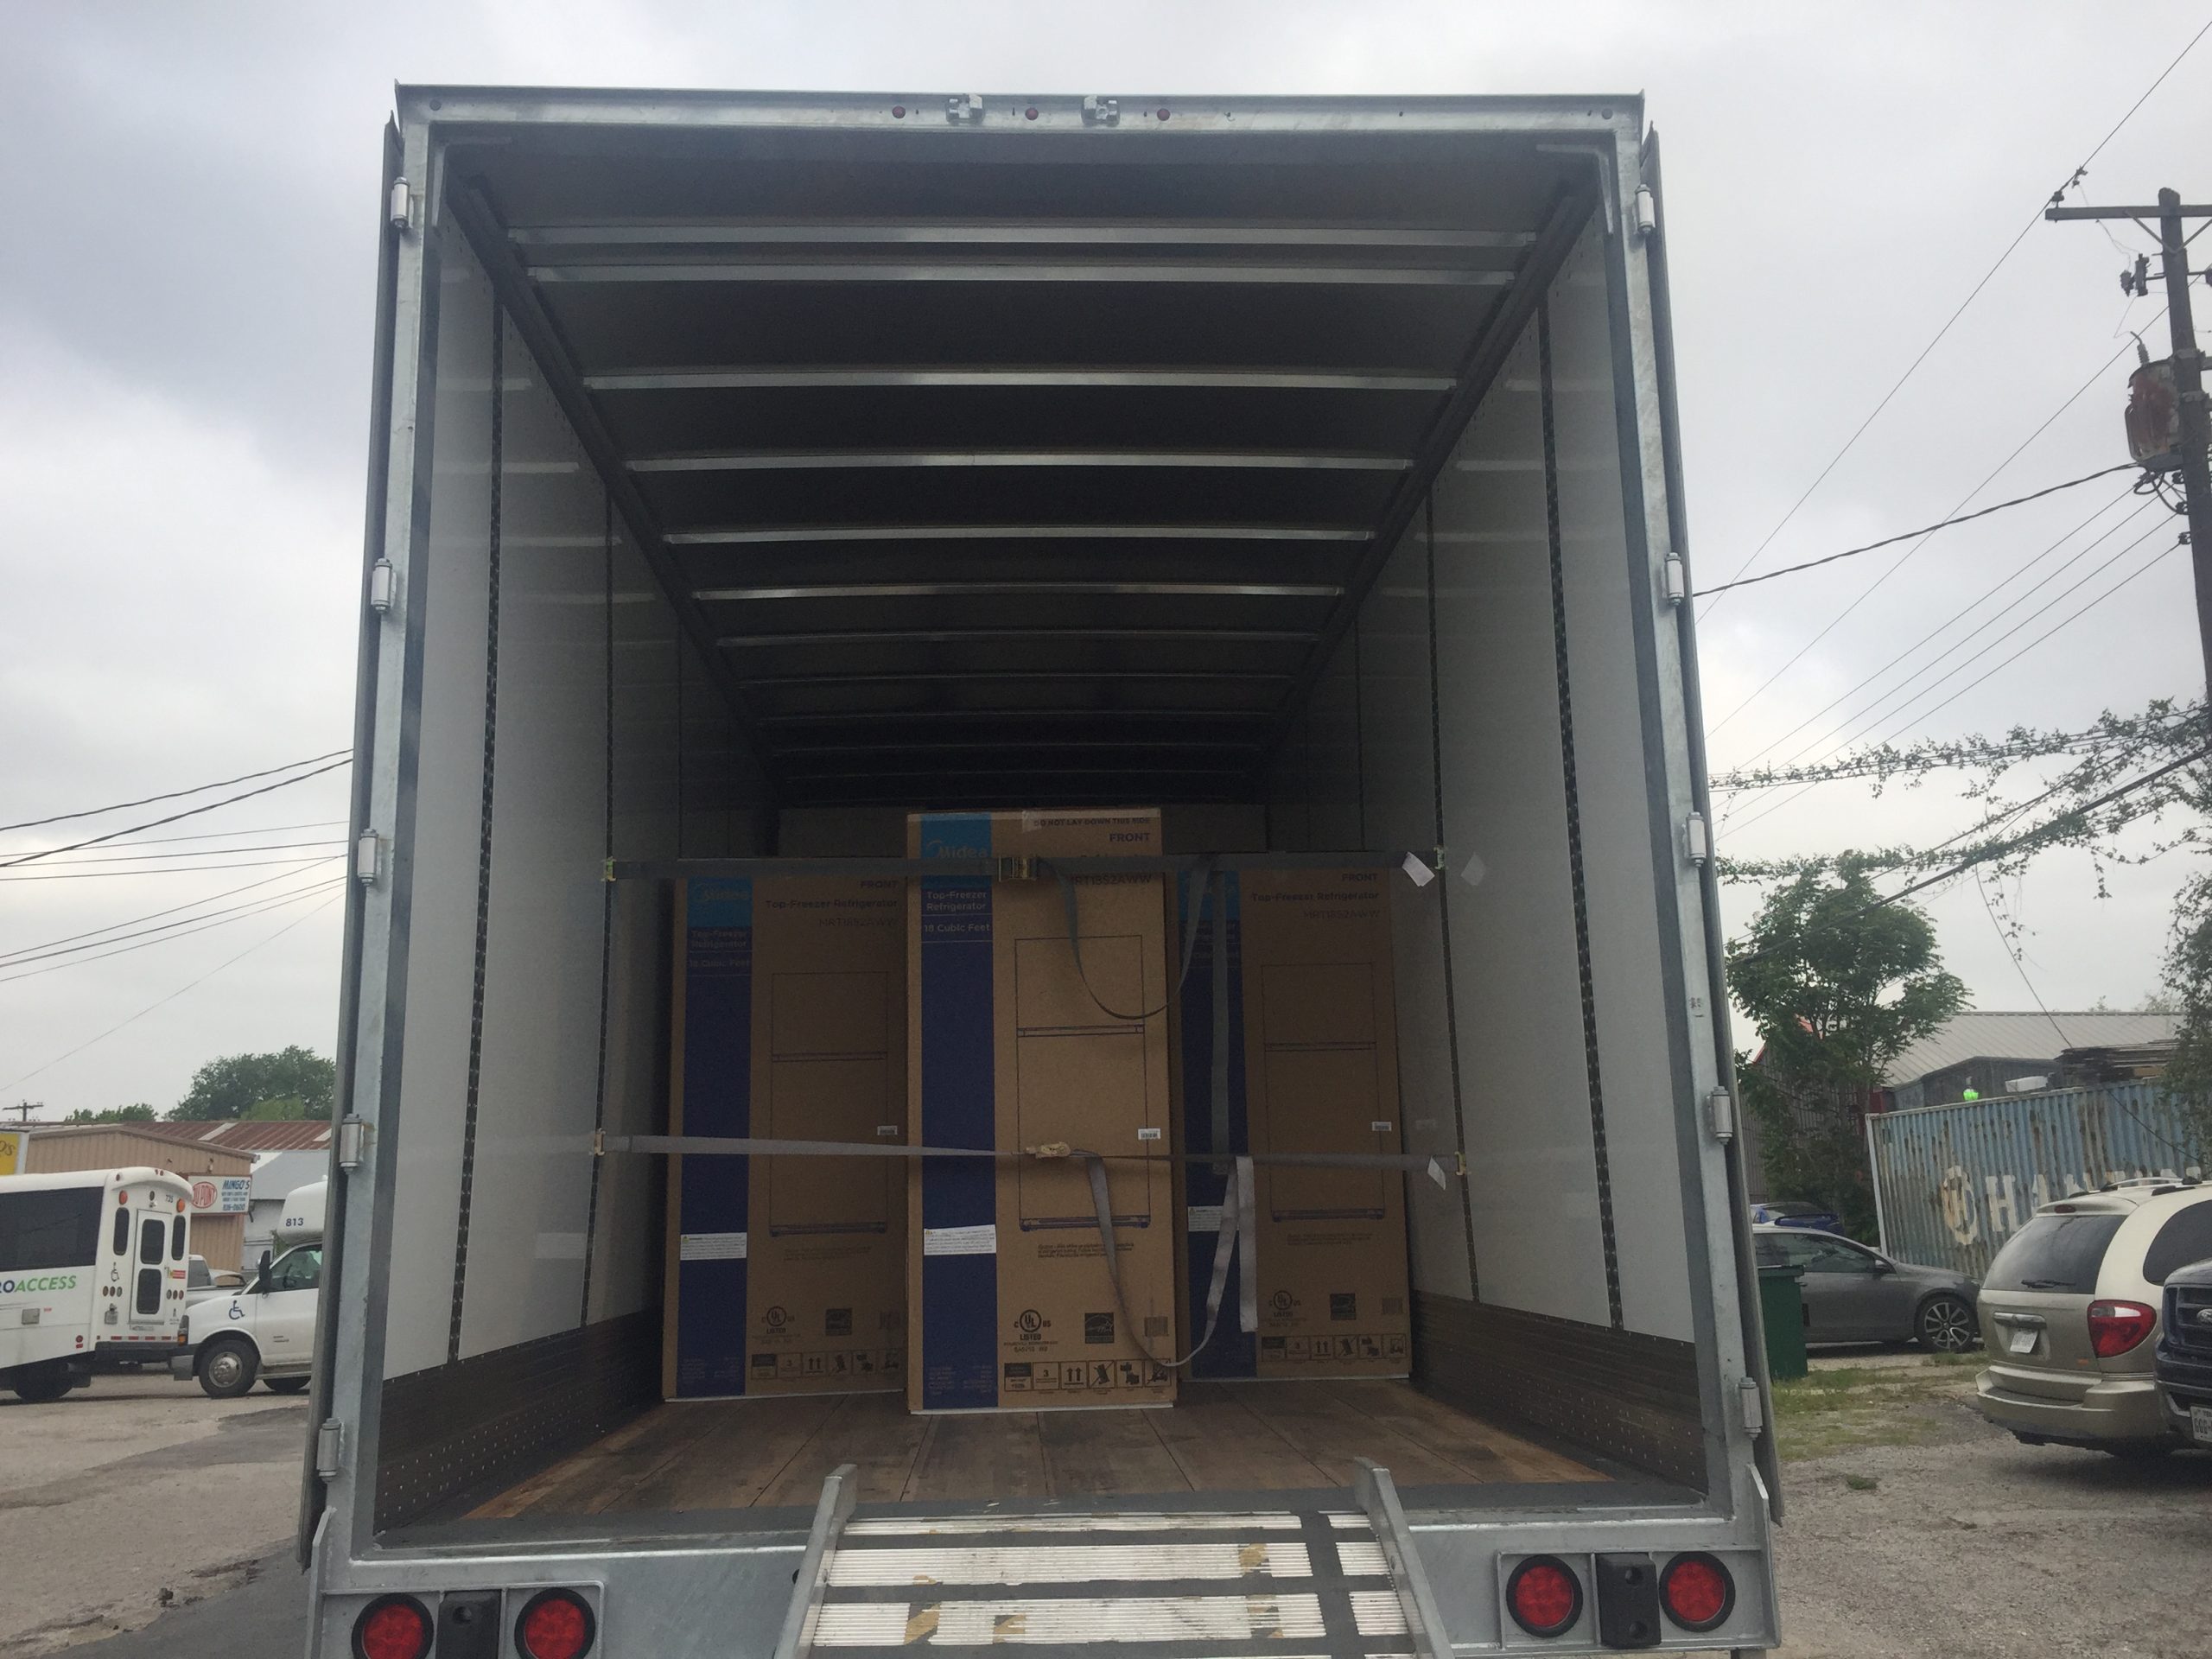 example pictures of Another truckload of new Demanufacture Midea 18 cu ft refrigerators.